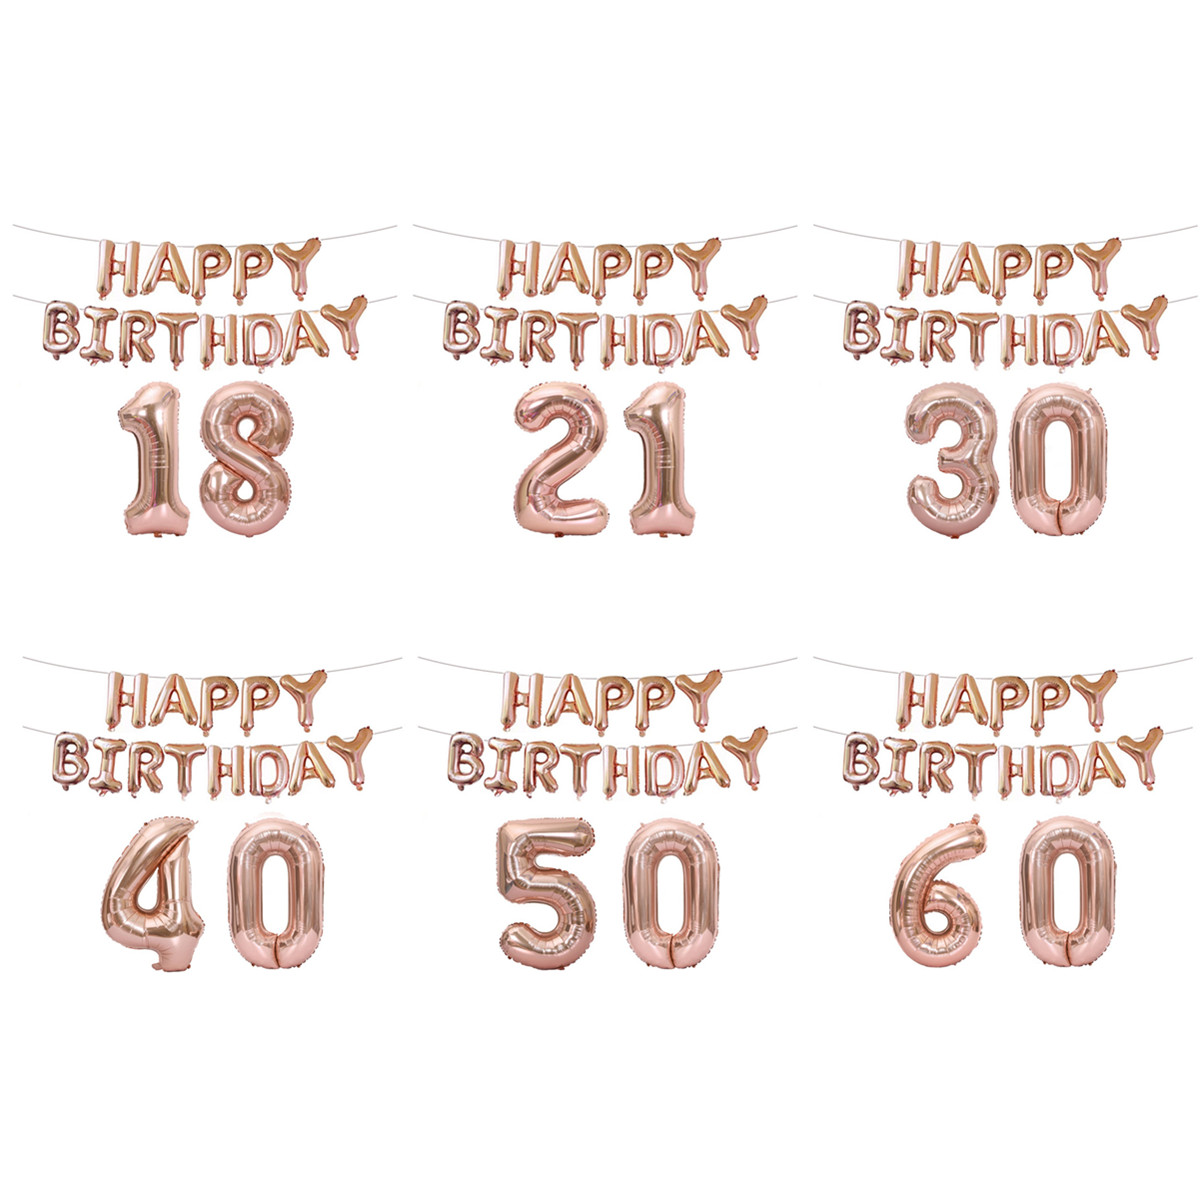 182130405060th-Rose-Gold-Happy-Birthday-Foil-Balloon-Banner-Kit-Party-Decorations-1456819-1